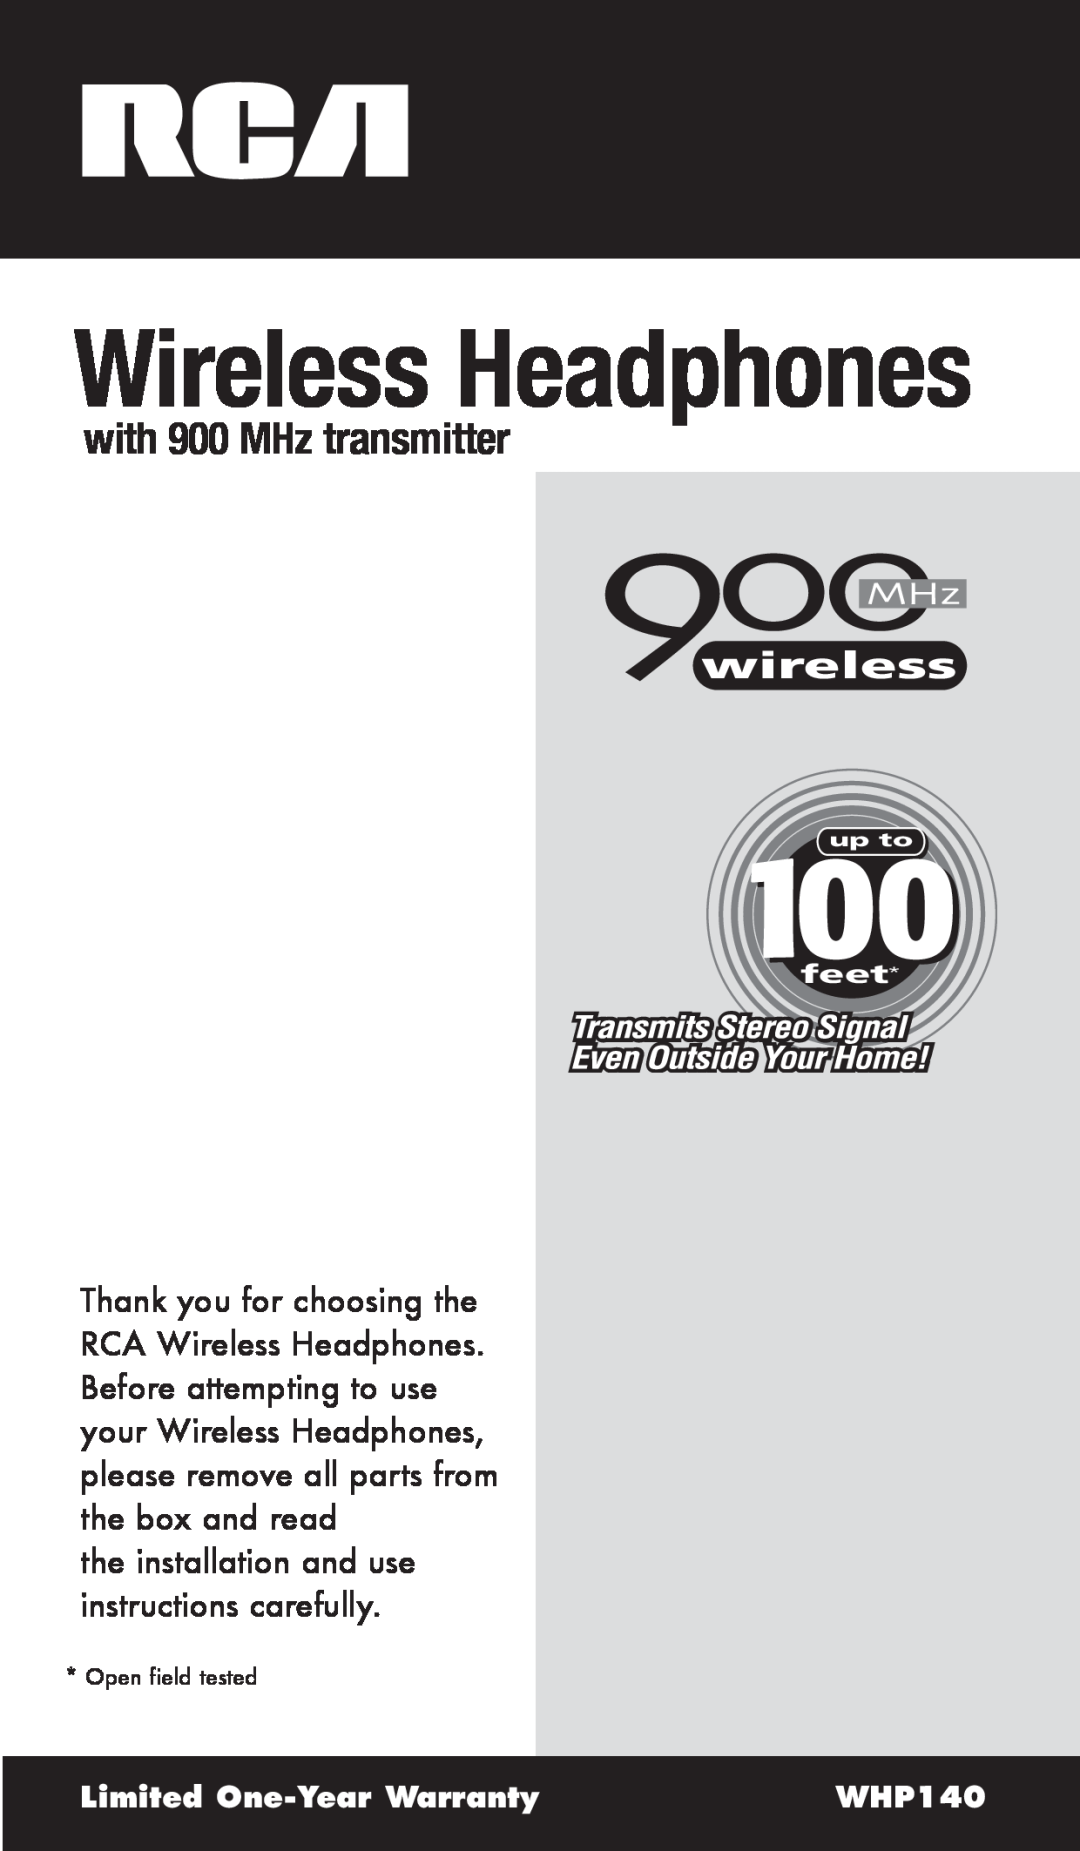 RCA WHP140 warranty Wireless Headphones, with 900 MHz transmitter, the installation and use instructions carefully, feet 